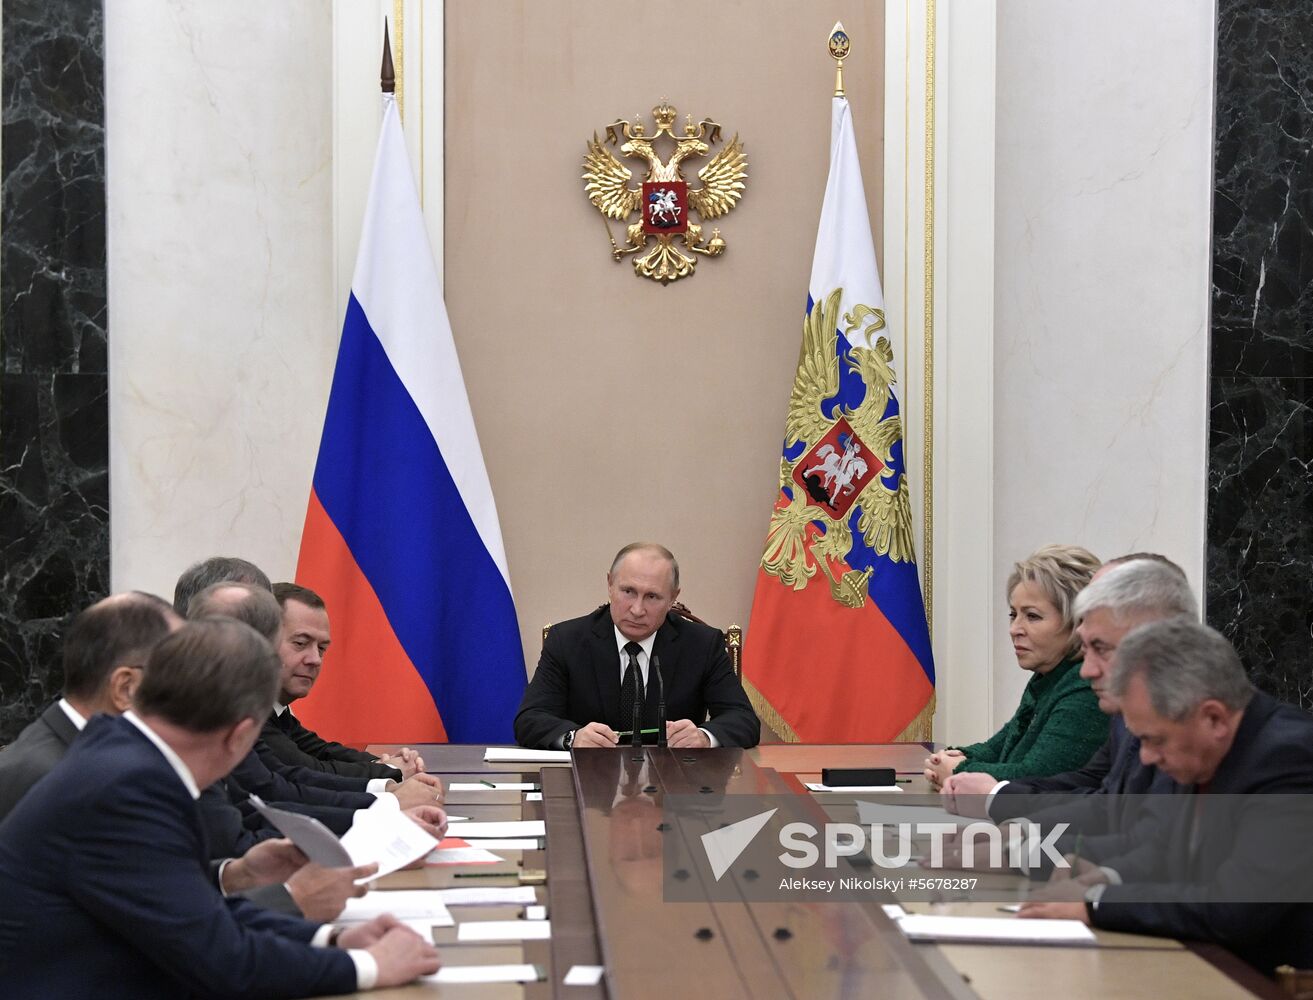 President Putin chairs Russia’s Security Council meeting